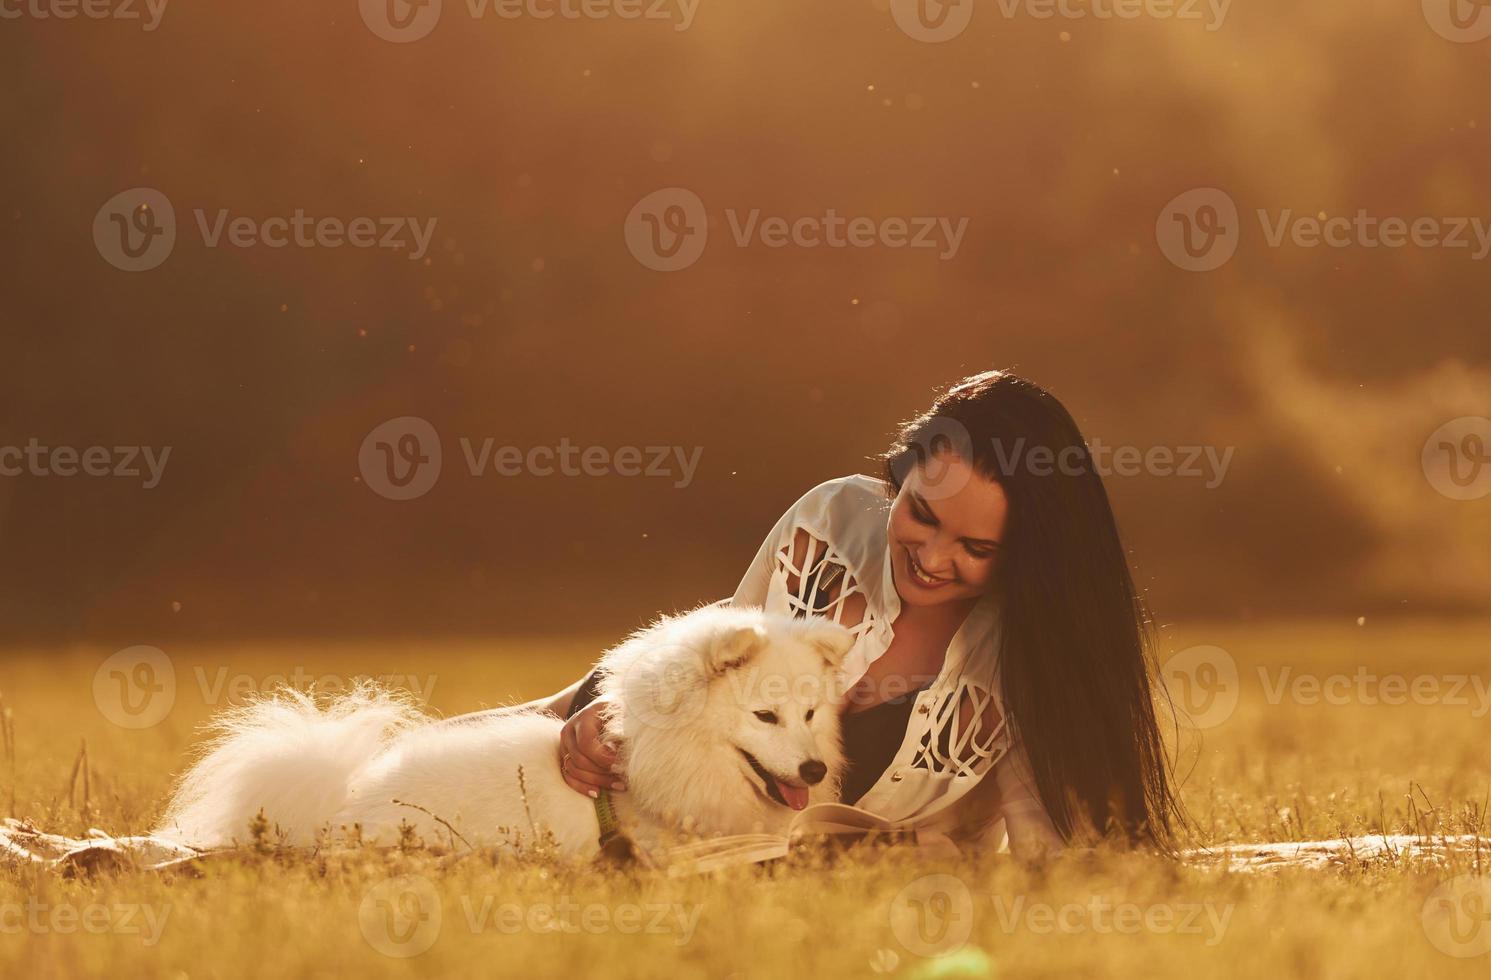 Laying down on the ground. Woman with her dog is having fun on the field at sunny daytime photo